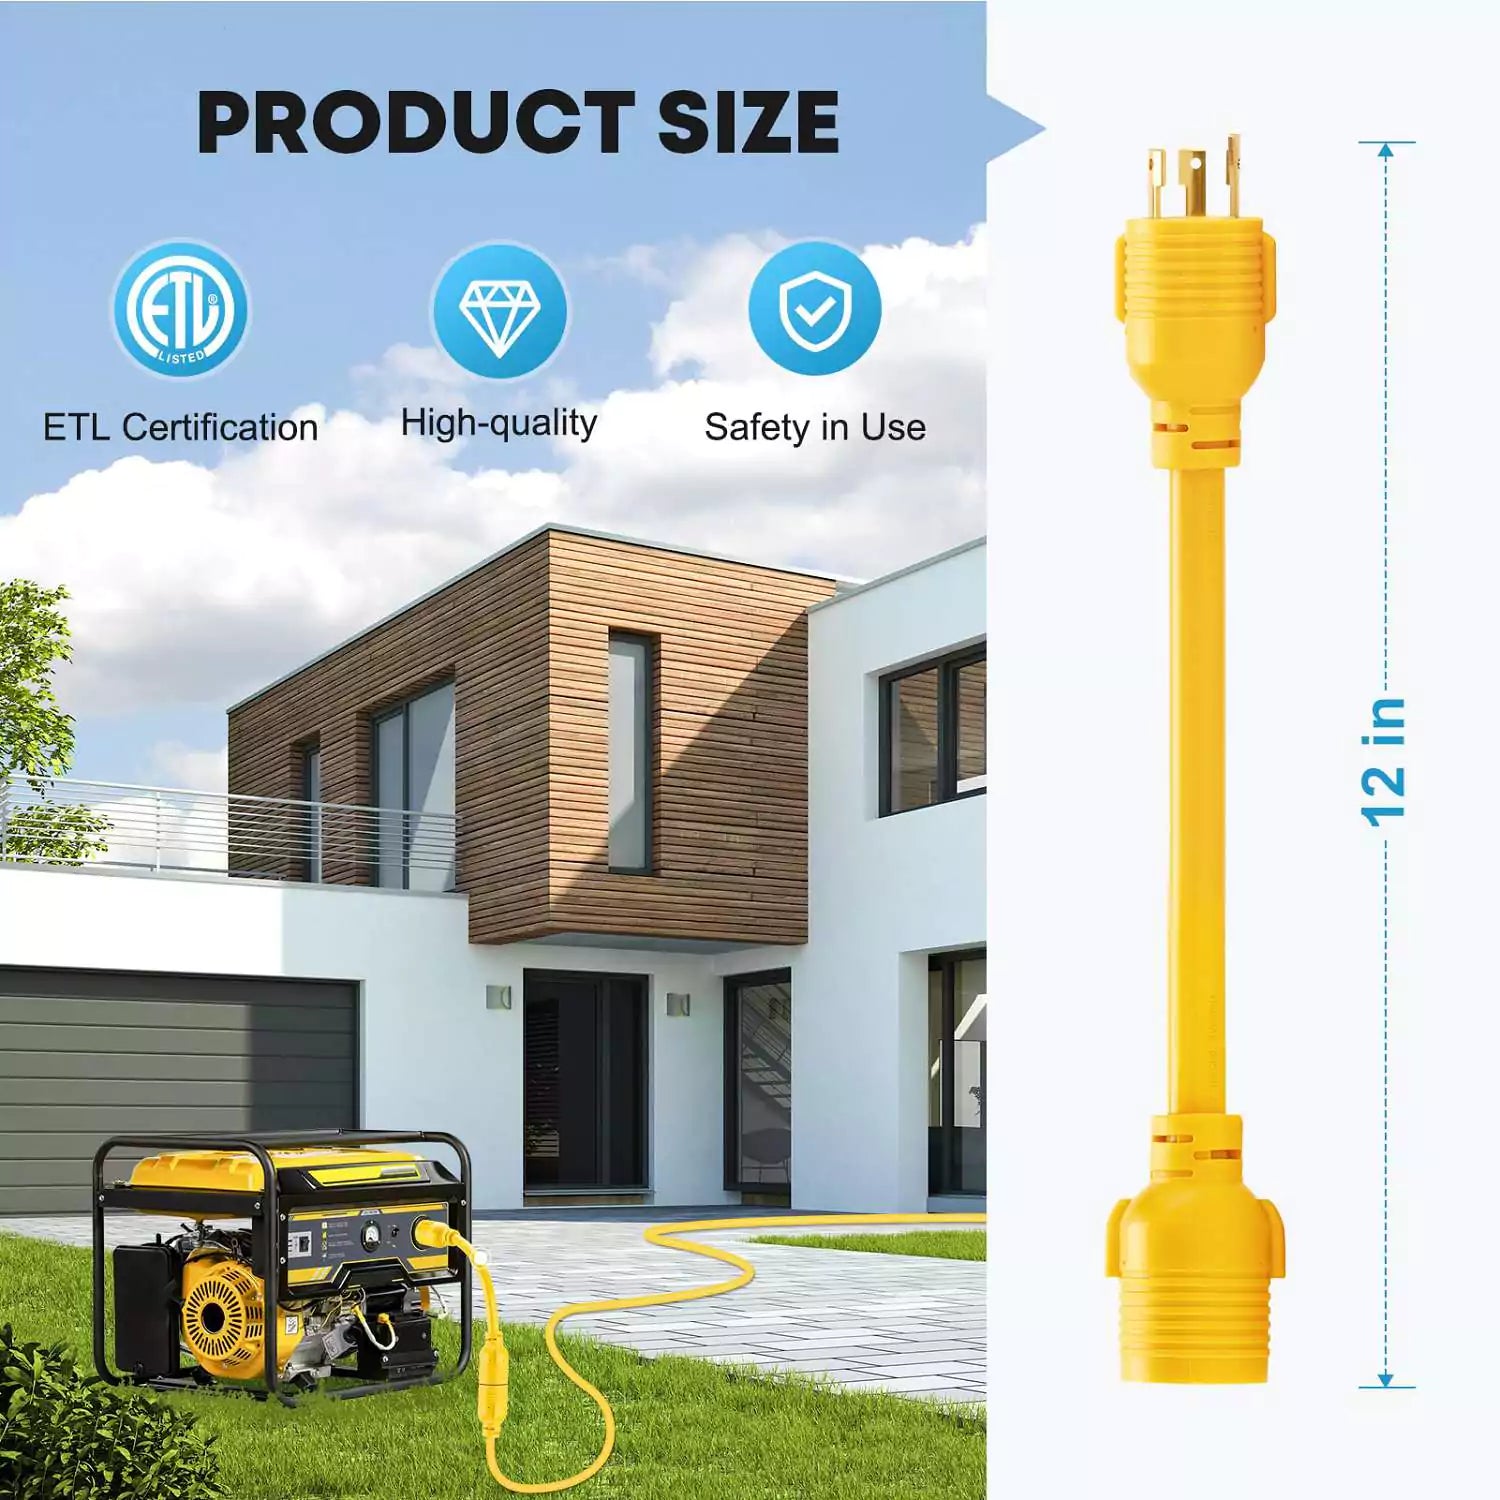 Adapter generator product size